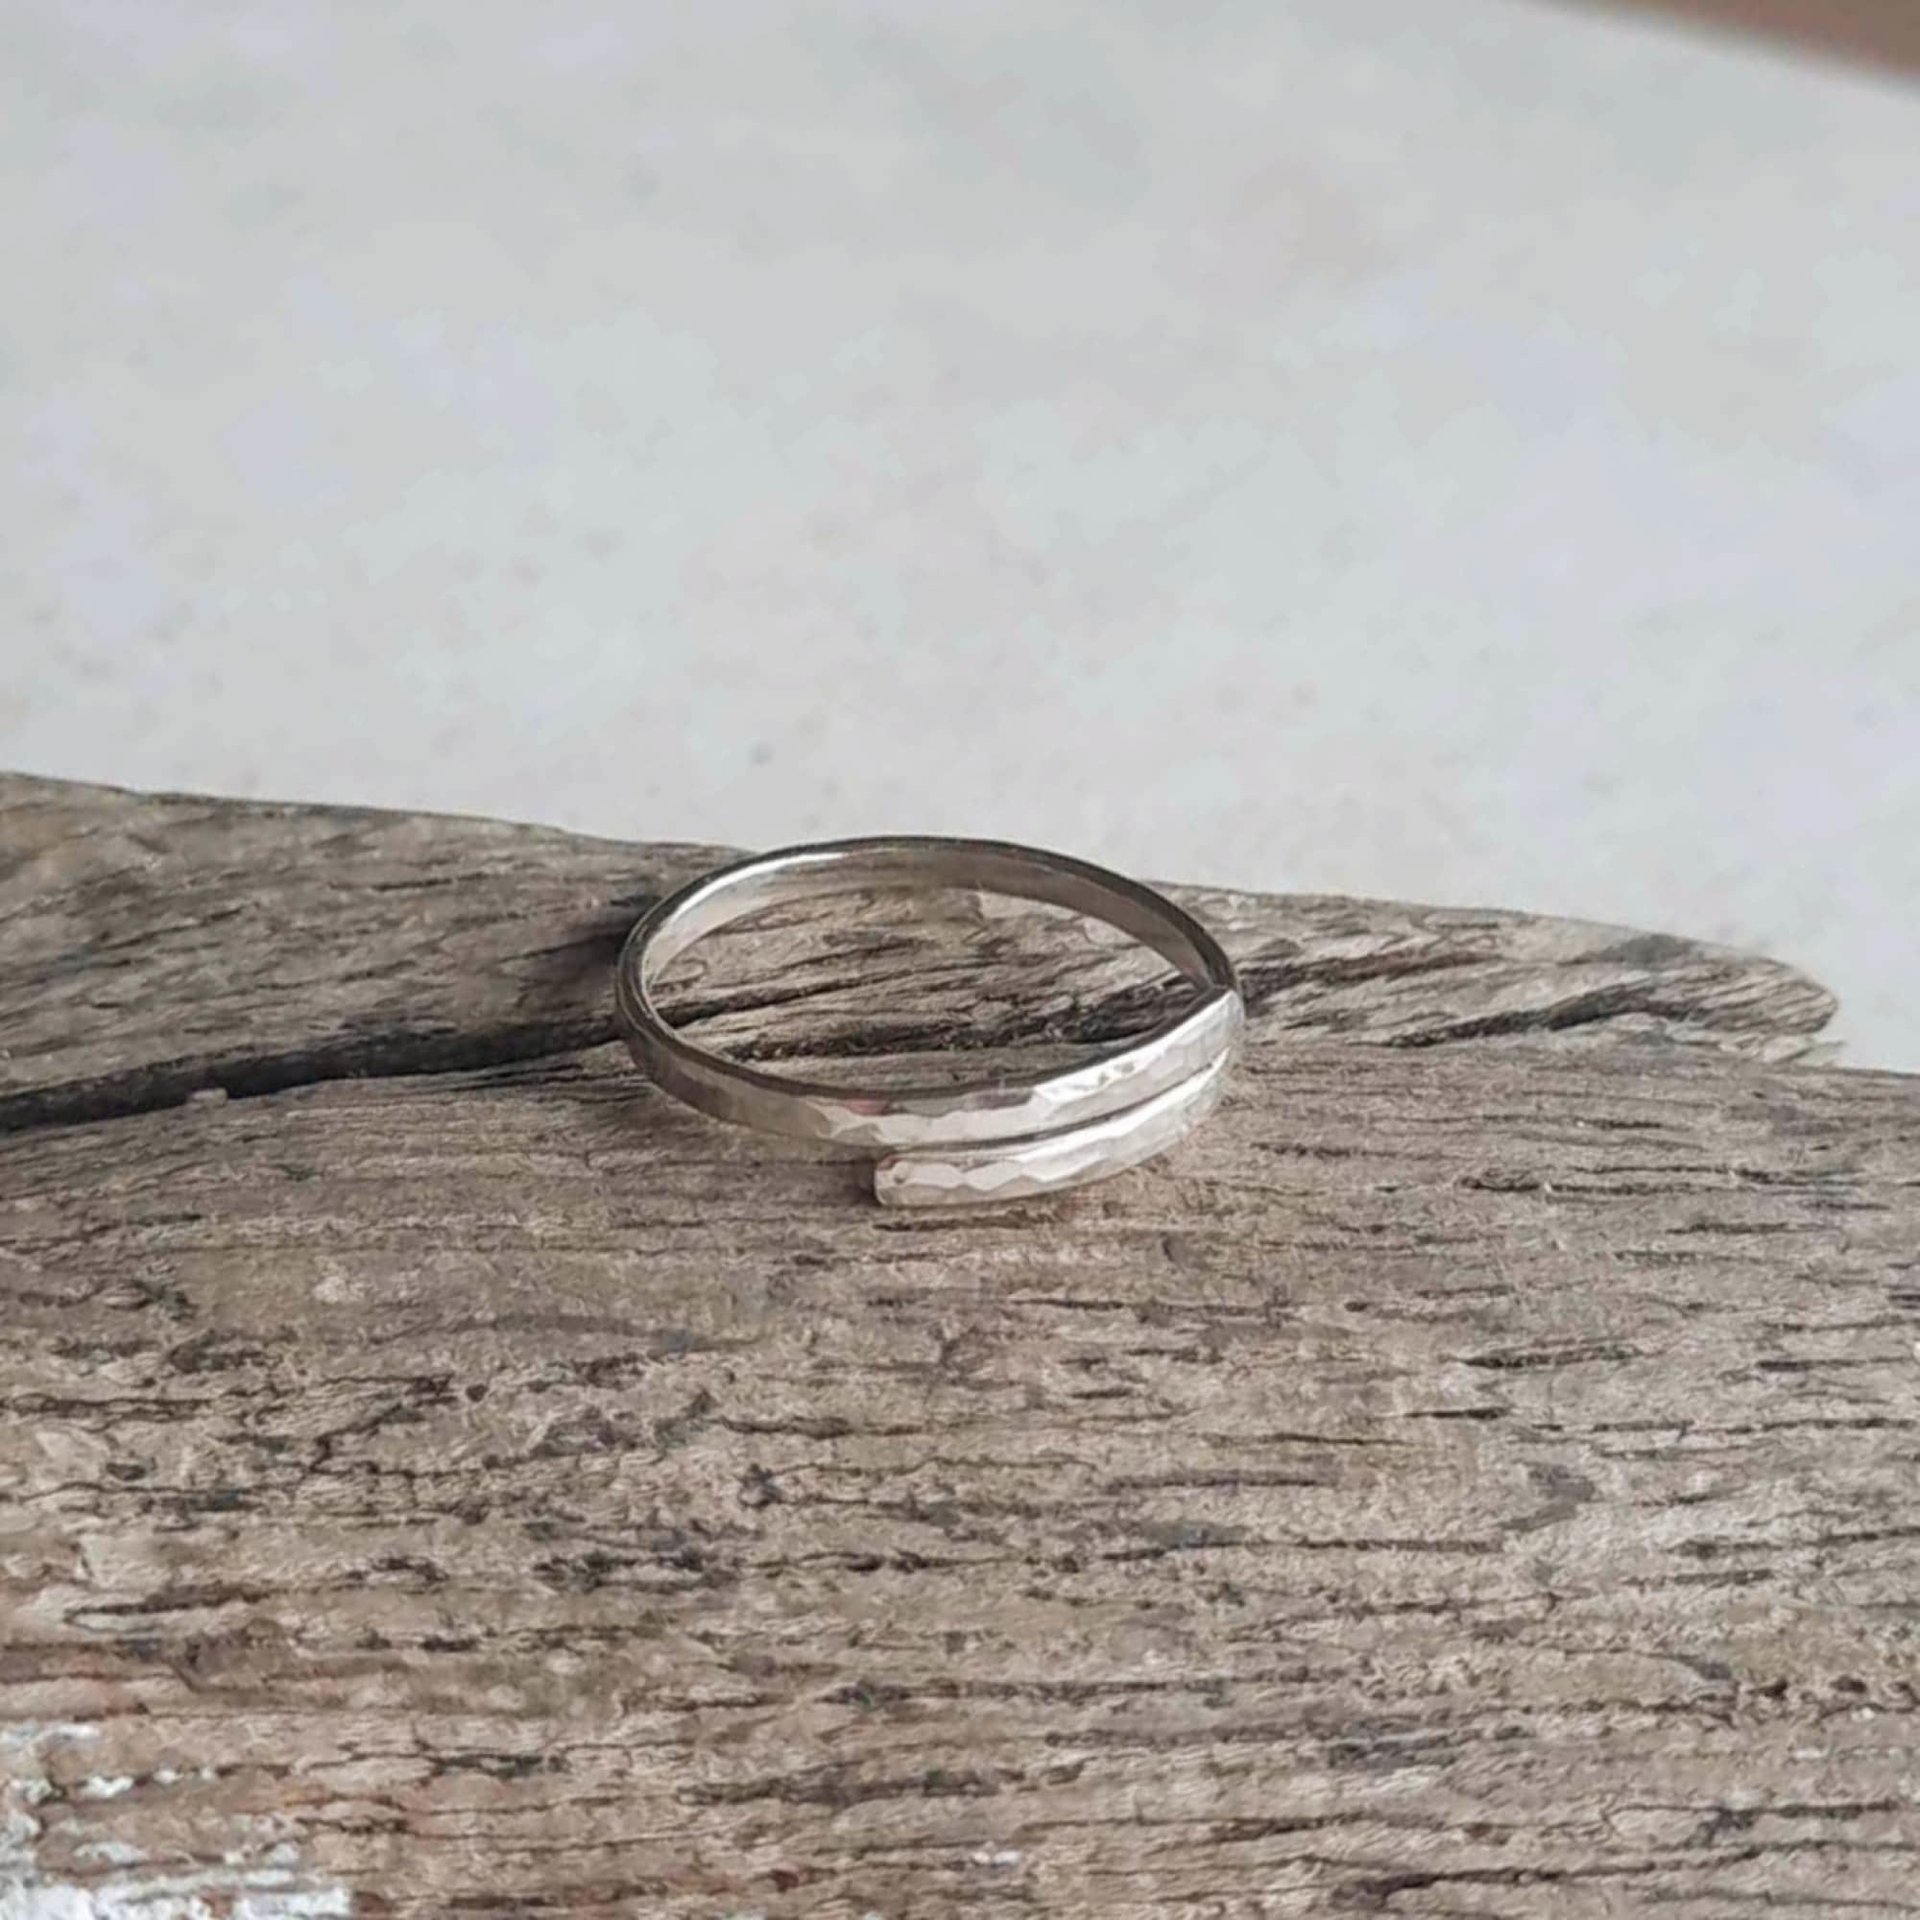 Recycled sterling silver adjustable spiral finger, midi or thumb ring, hand crafted The Tiny Tree Frog Jewellery